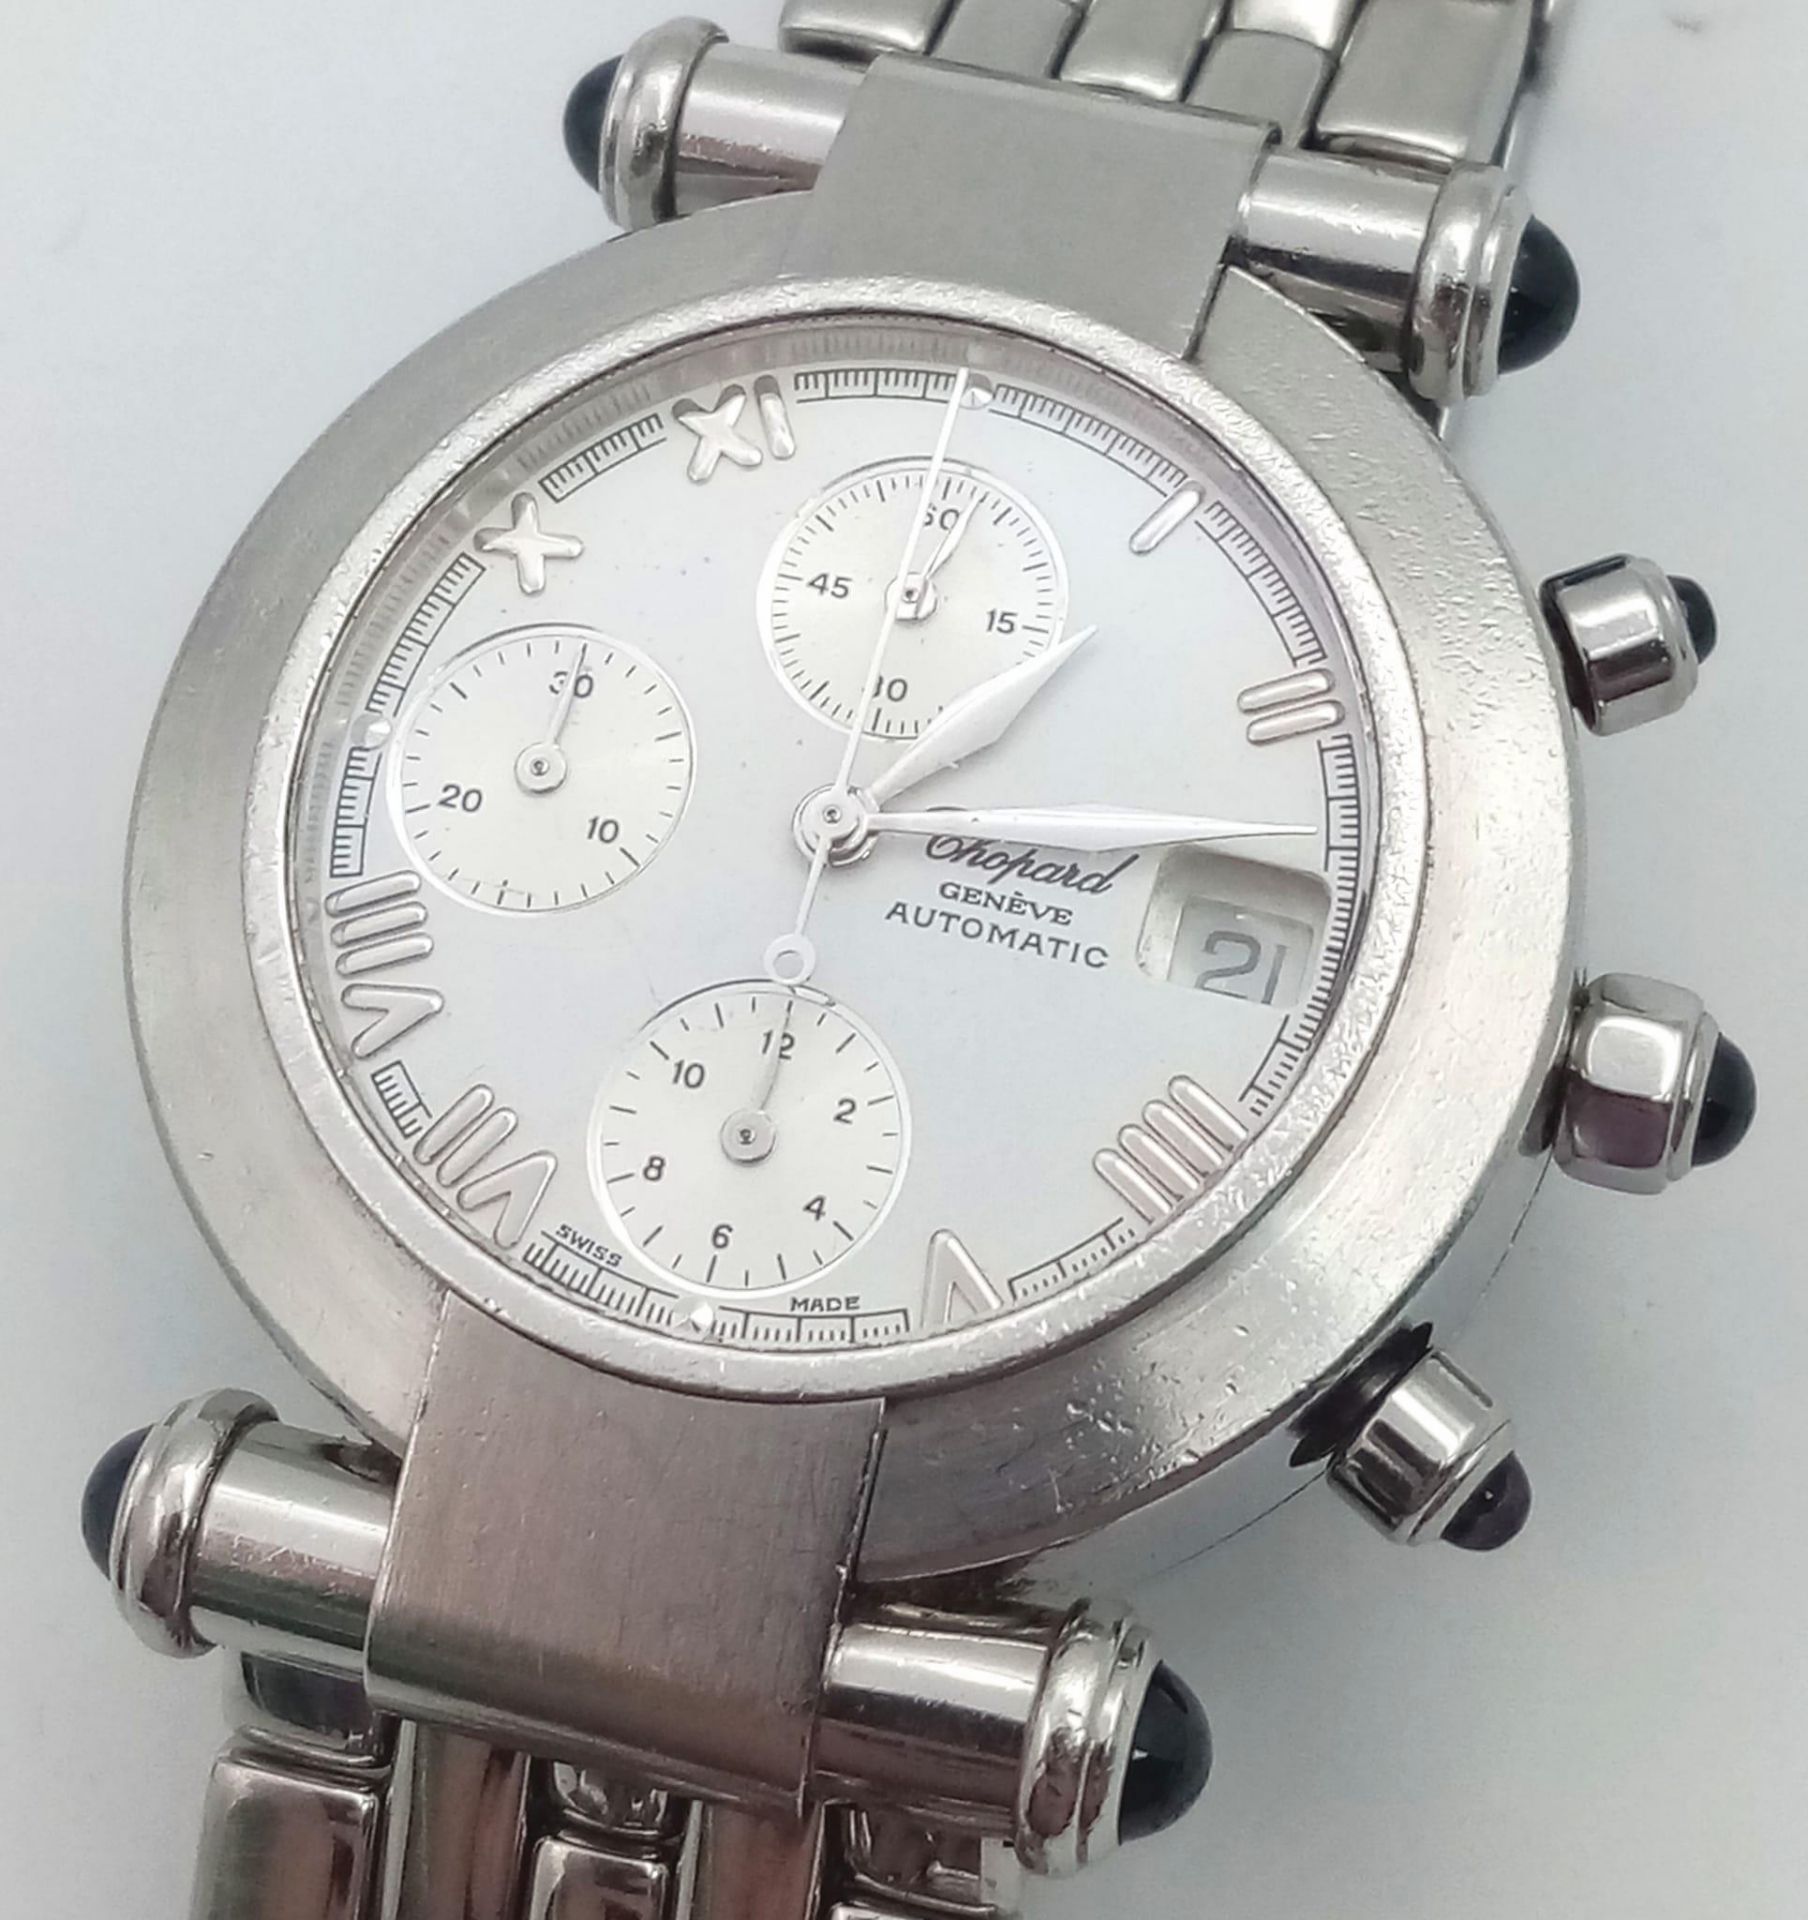 A Chopard Automatic Chronograph Gents Watch. Stainless steel bracelet and case - 37mm. White dial - Bild 6 aus 8